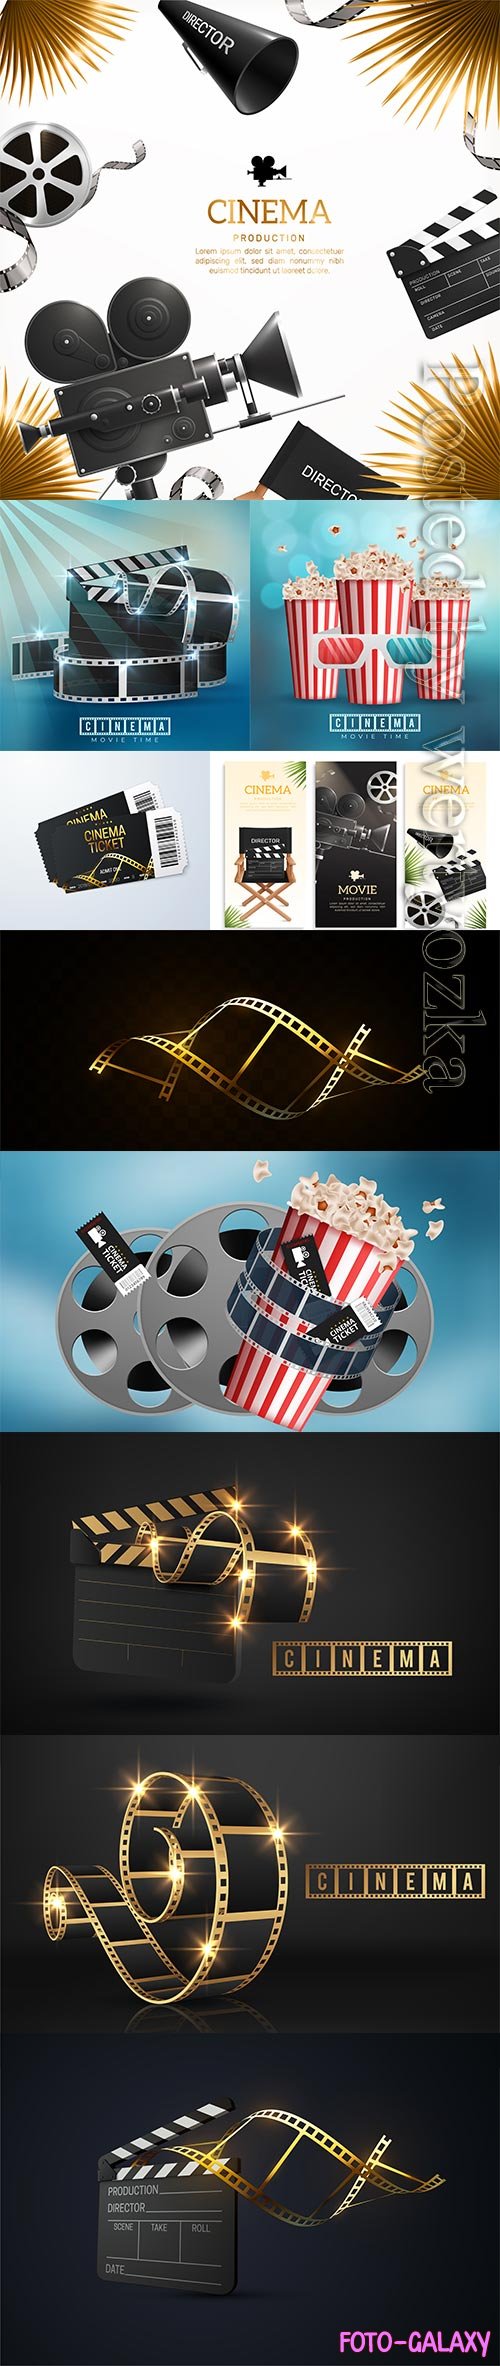 Realistic cinema movie background with film reel, clapper, popcorn, 3d glasses